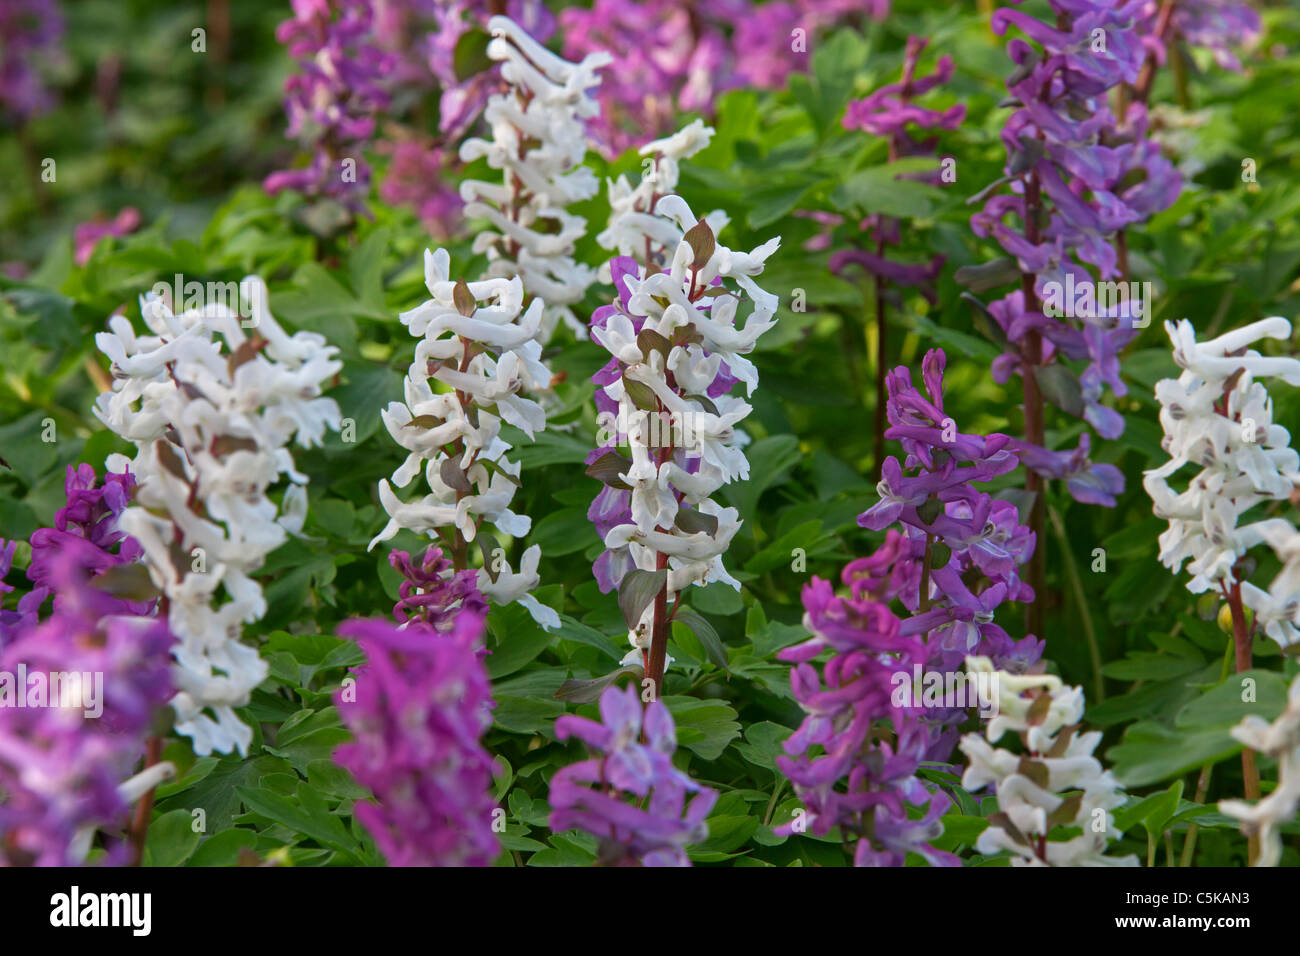 Hollowroot / bird-in-a-bush / fumewort (Corydalis cava) flowering in forest in spring, Germany Stock Photo